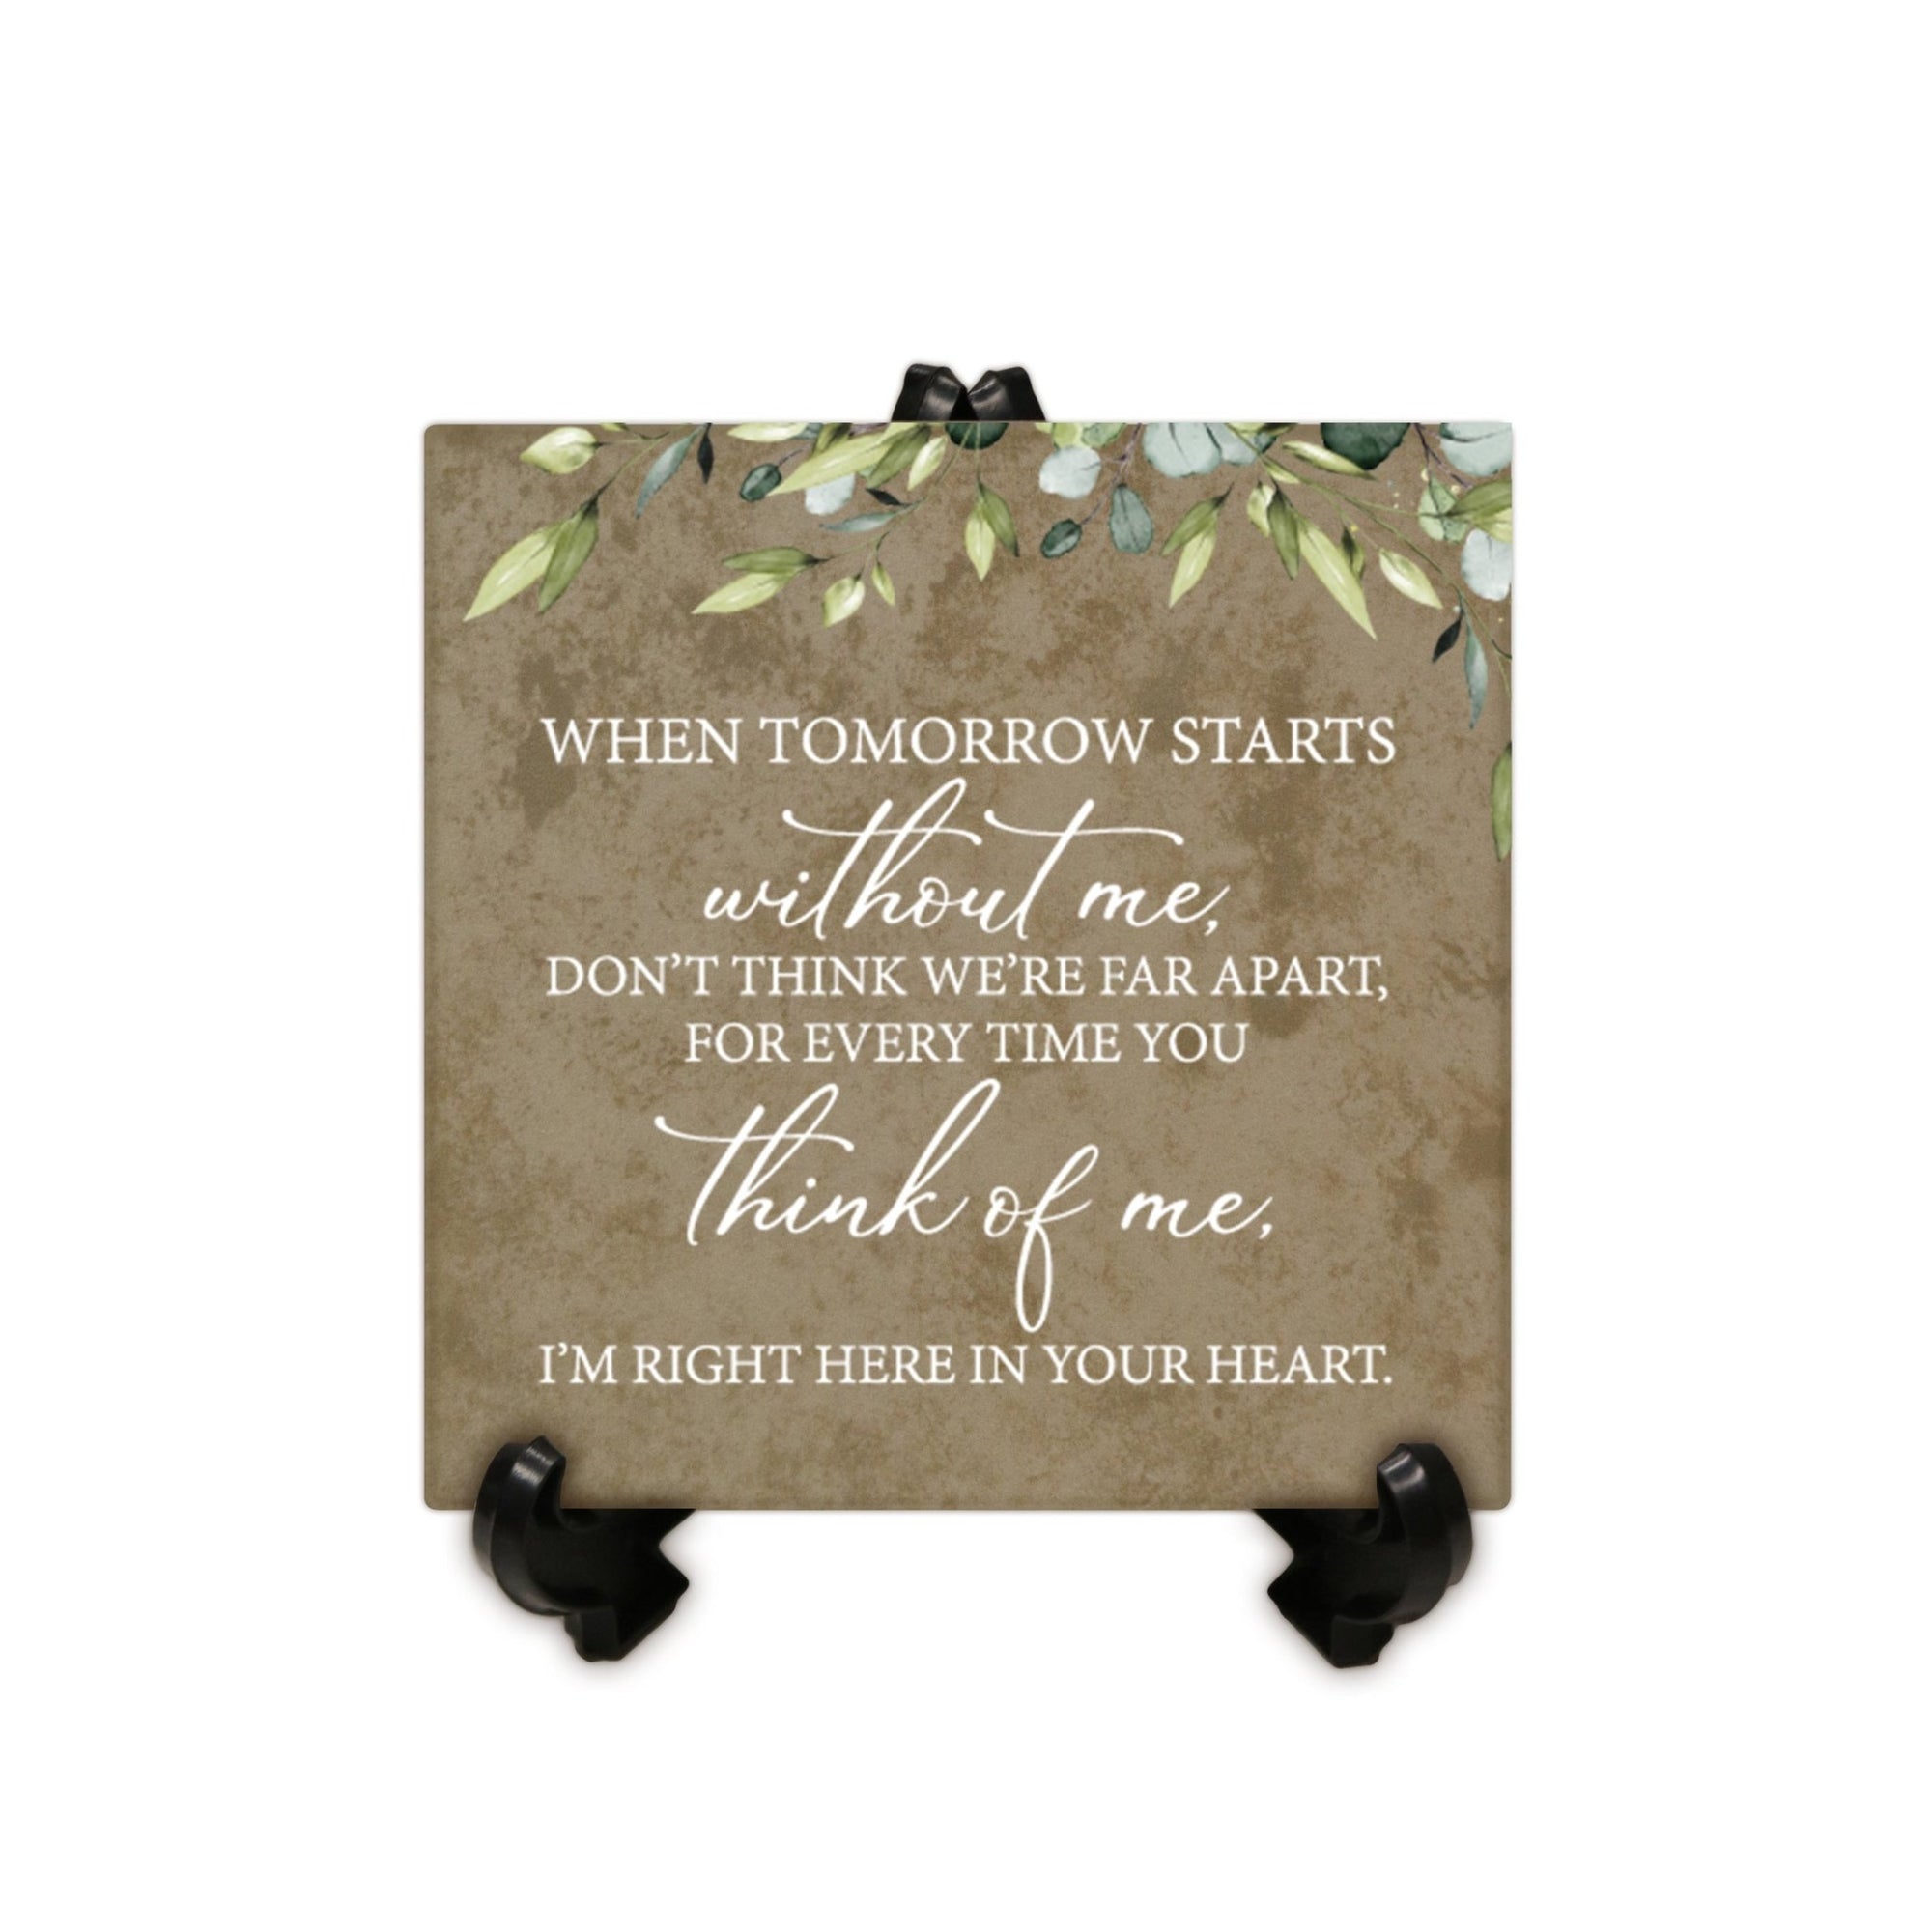 Memorial Ceramic Trivet with Stand for Home Decor - When Tomorrow Starts - LifeSong Milestones